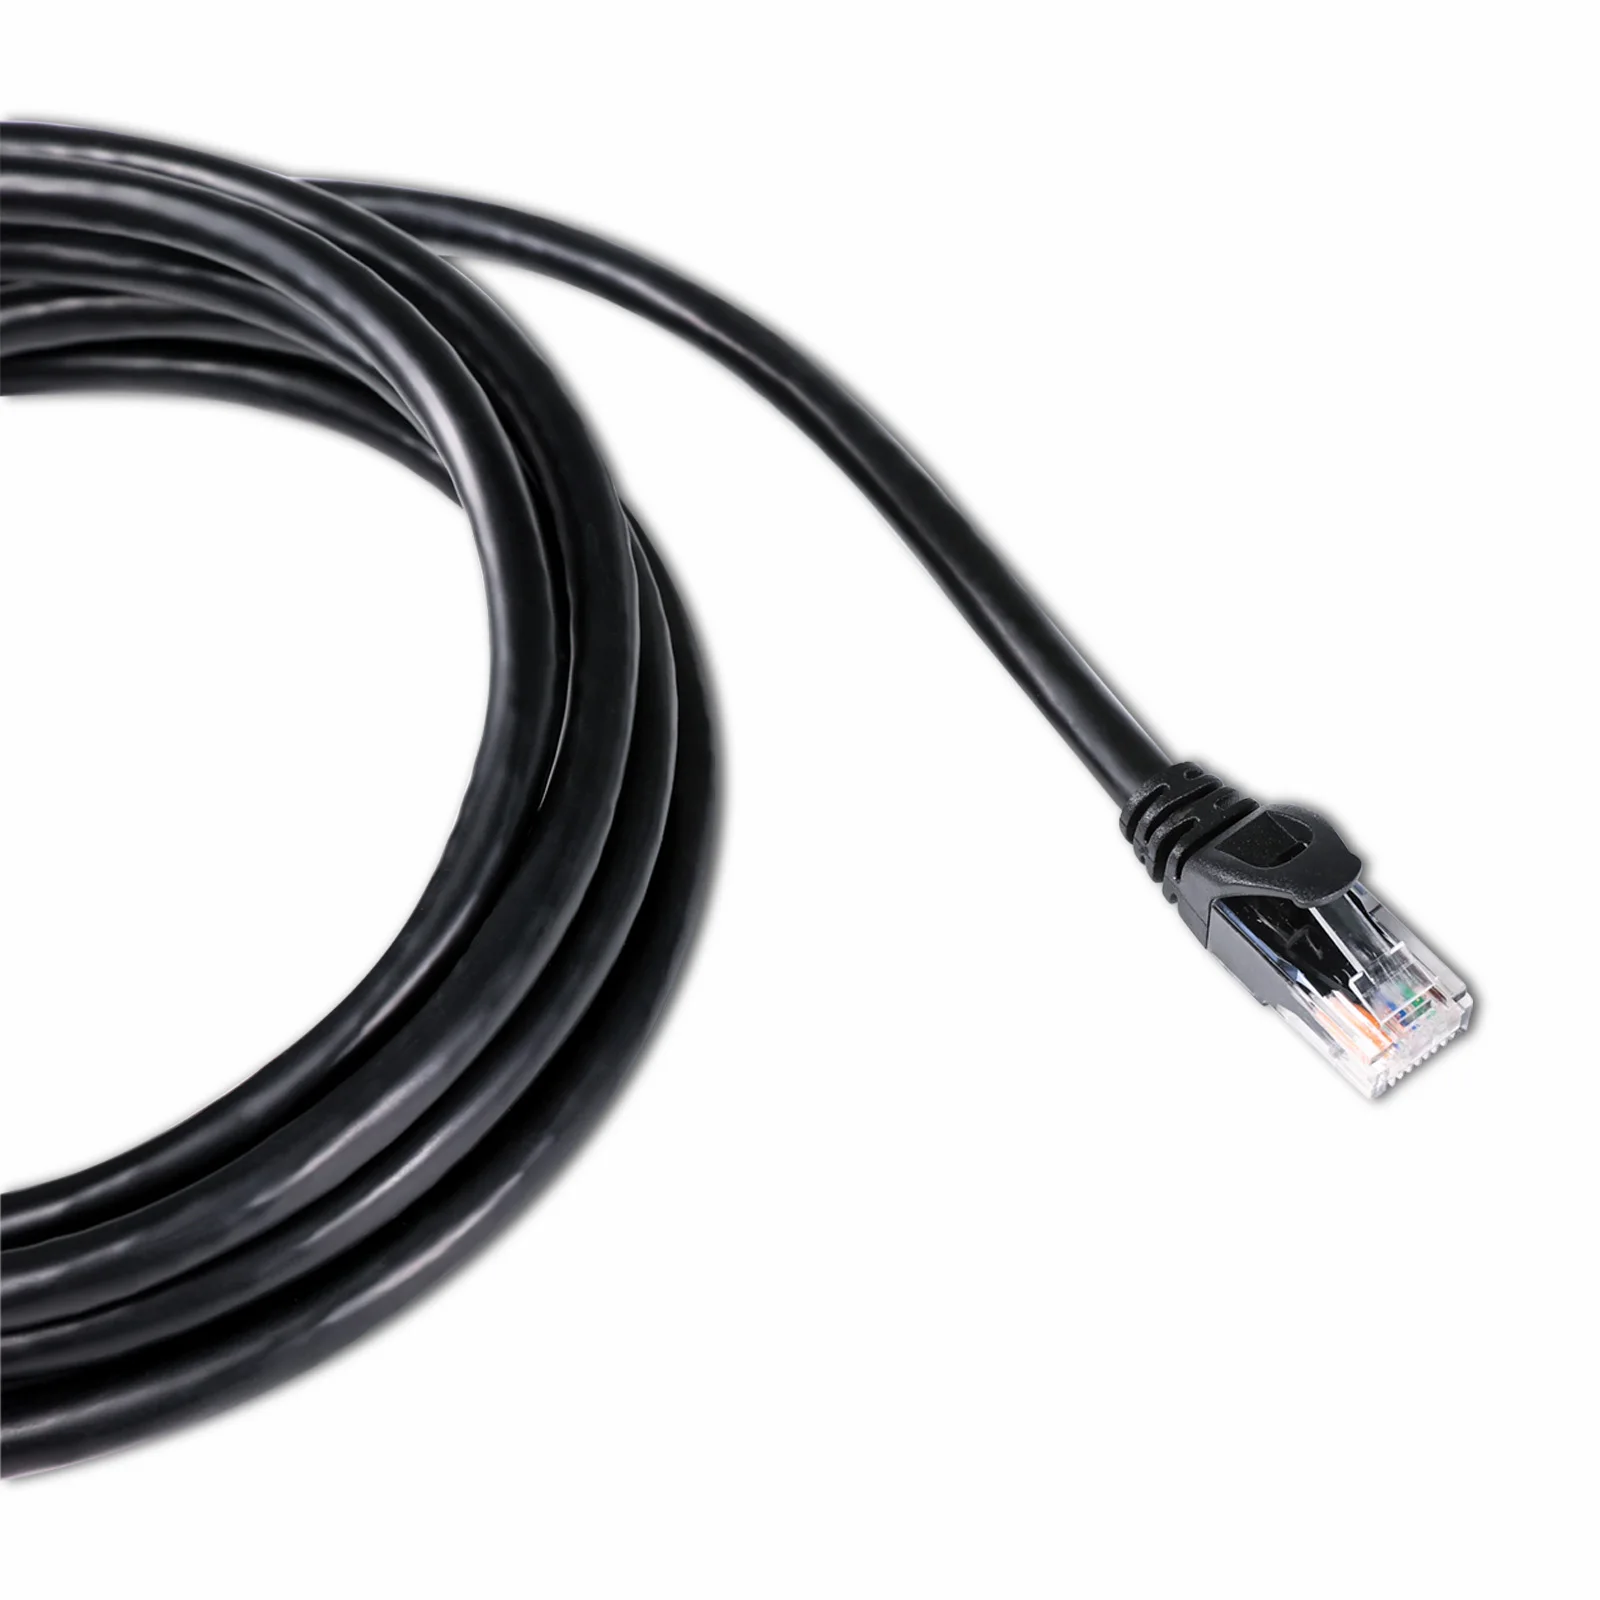 GE 12 ft. Cat 5e Ethernet Cable Black